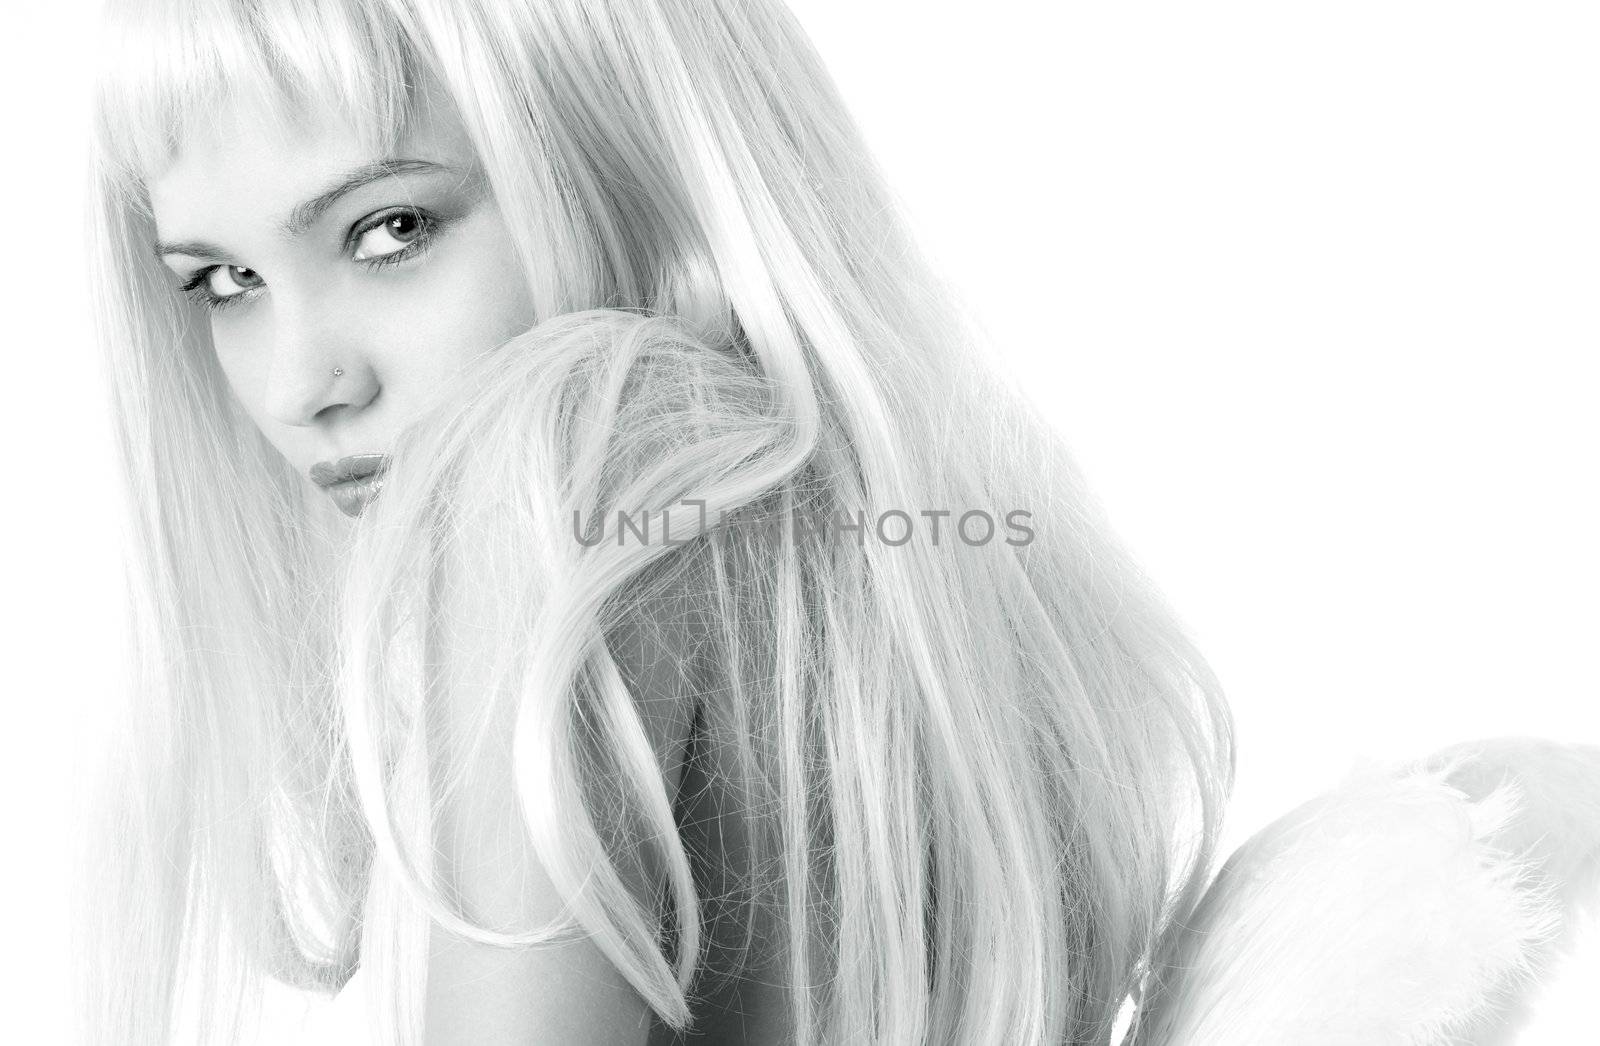 monochrome portrait of lovely blond with angel wings